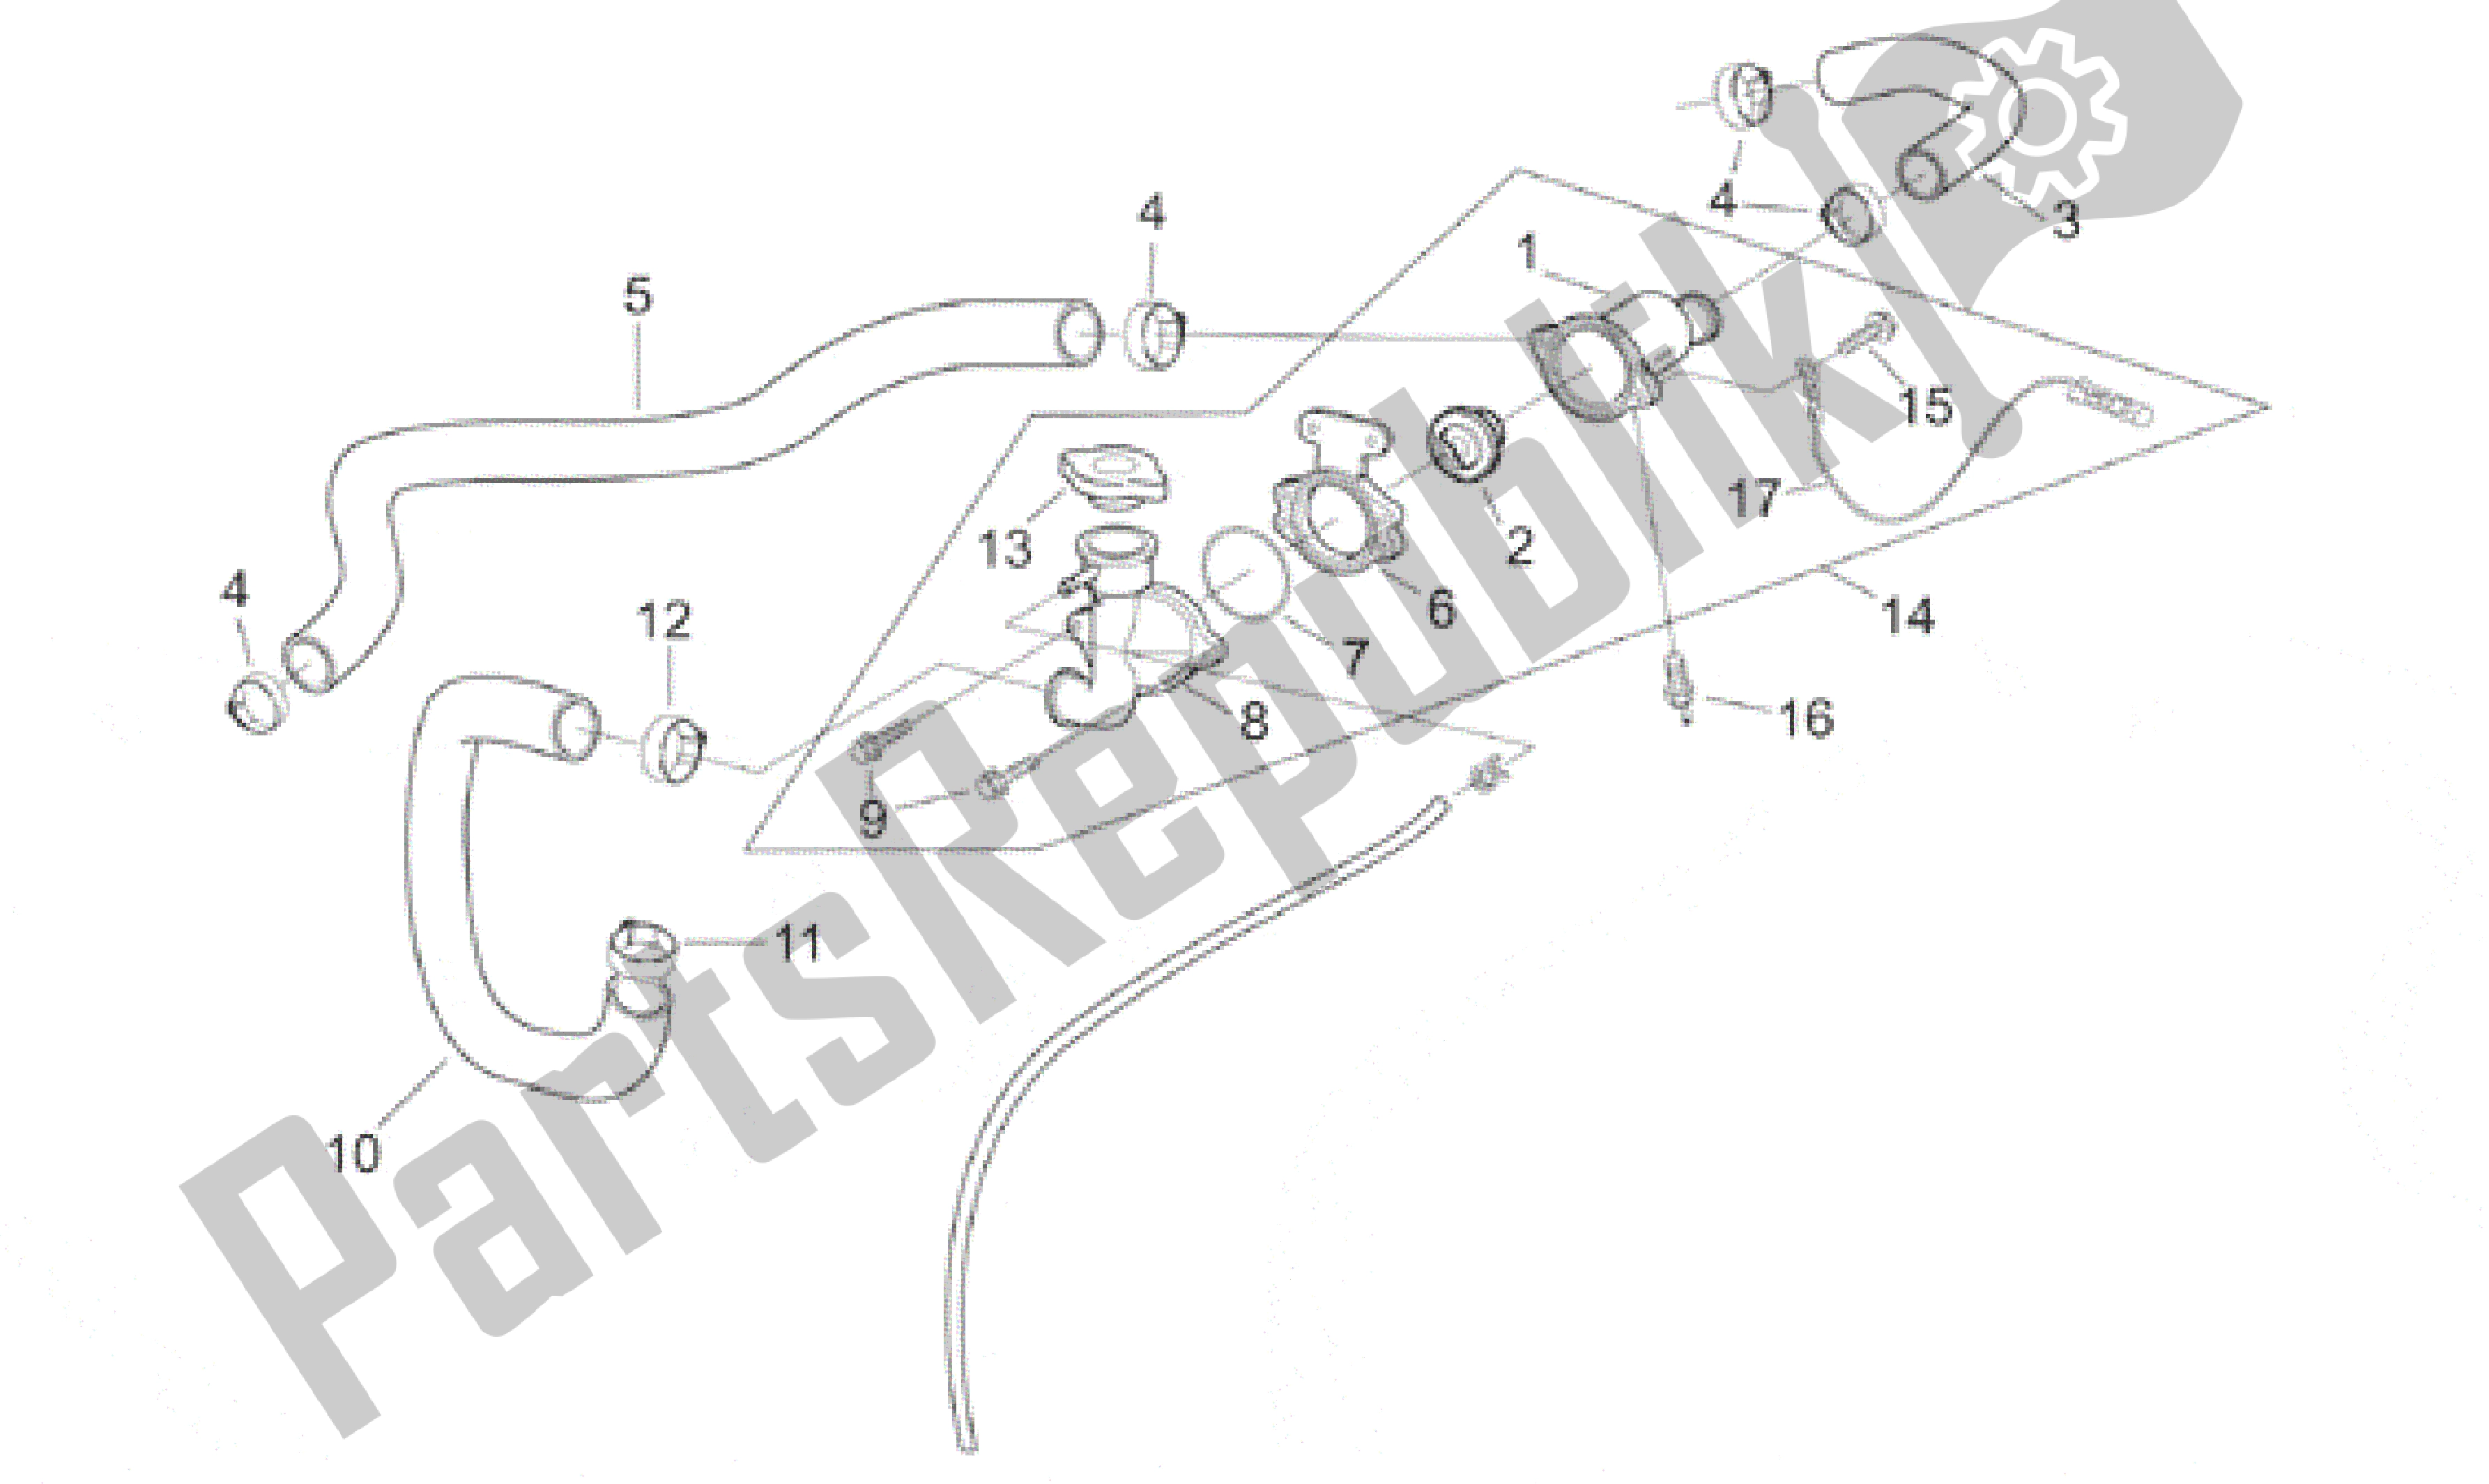 All parts for the Thermostat of the Aprilia RS 250 1998 - 2001